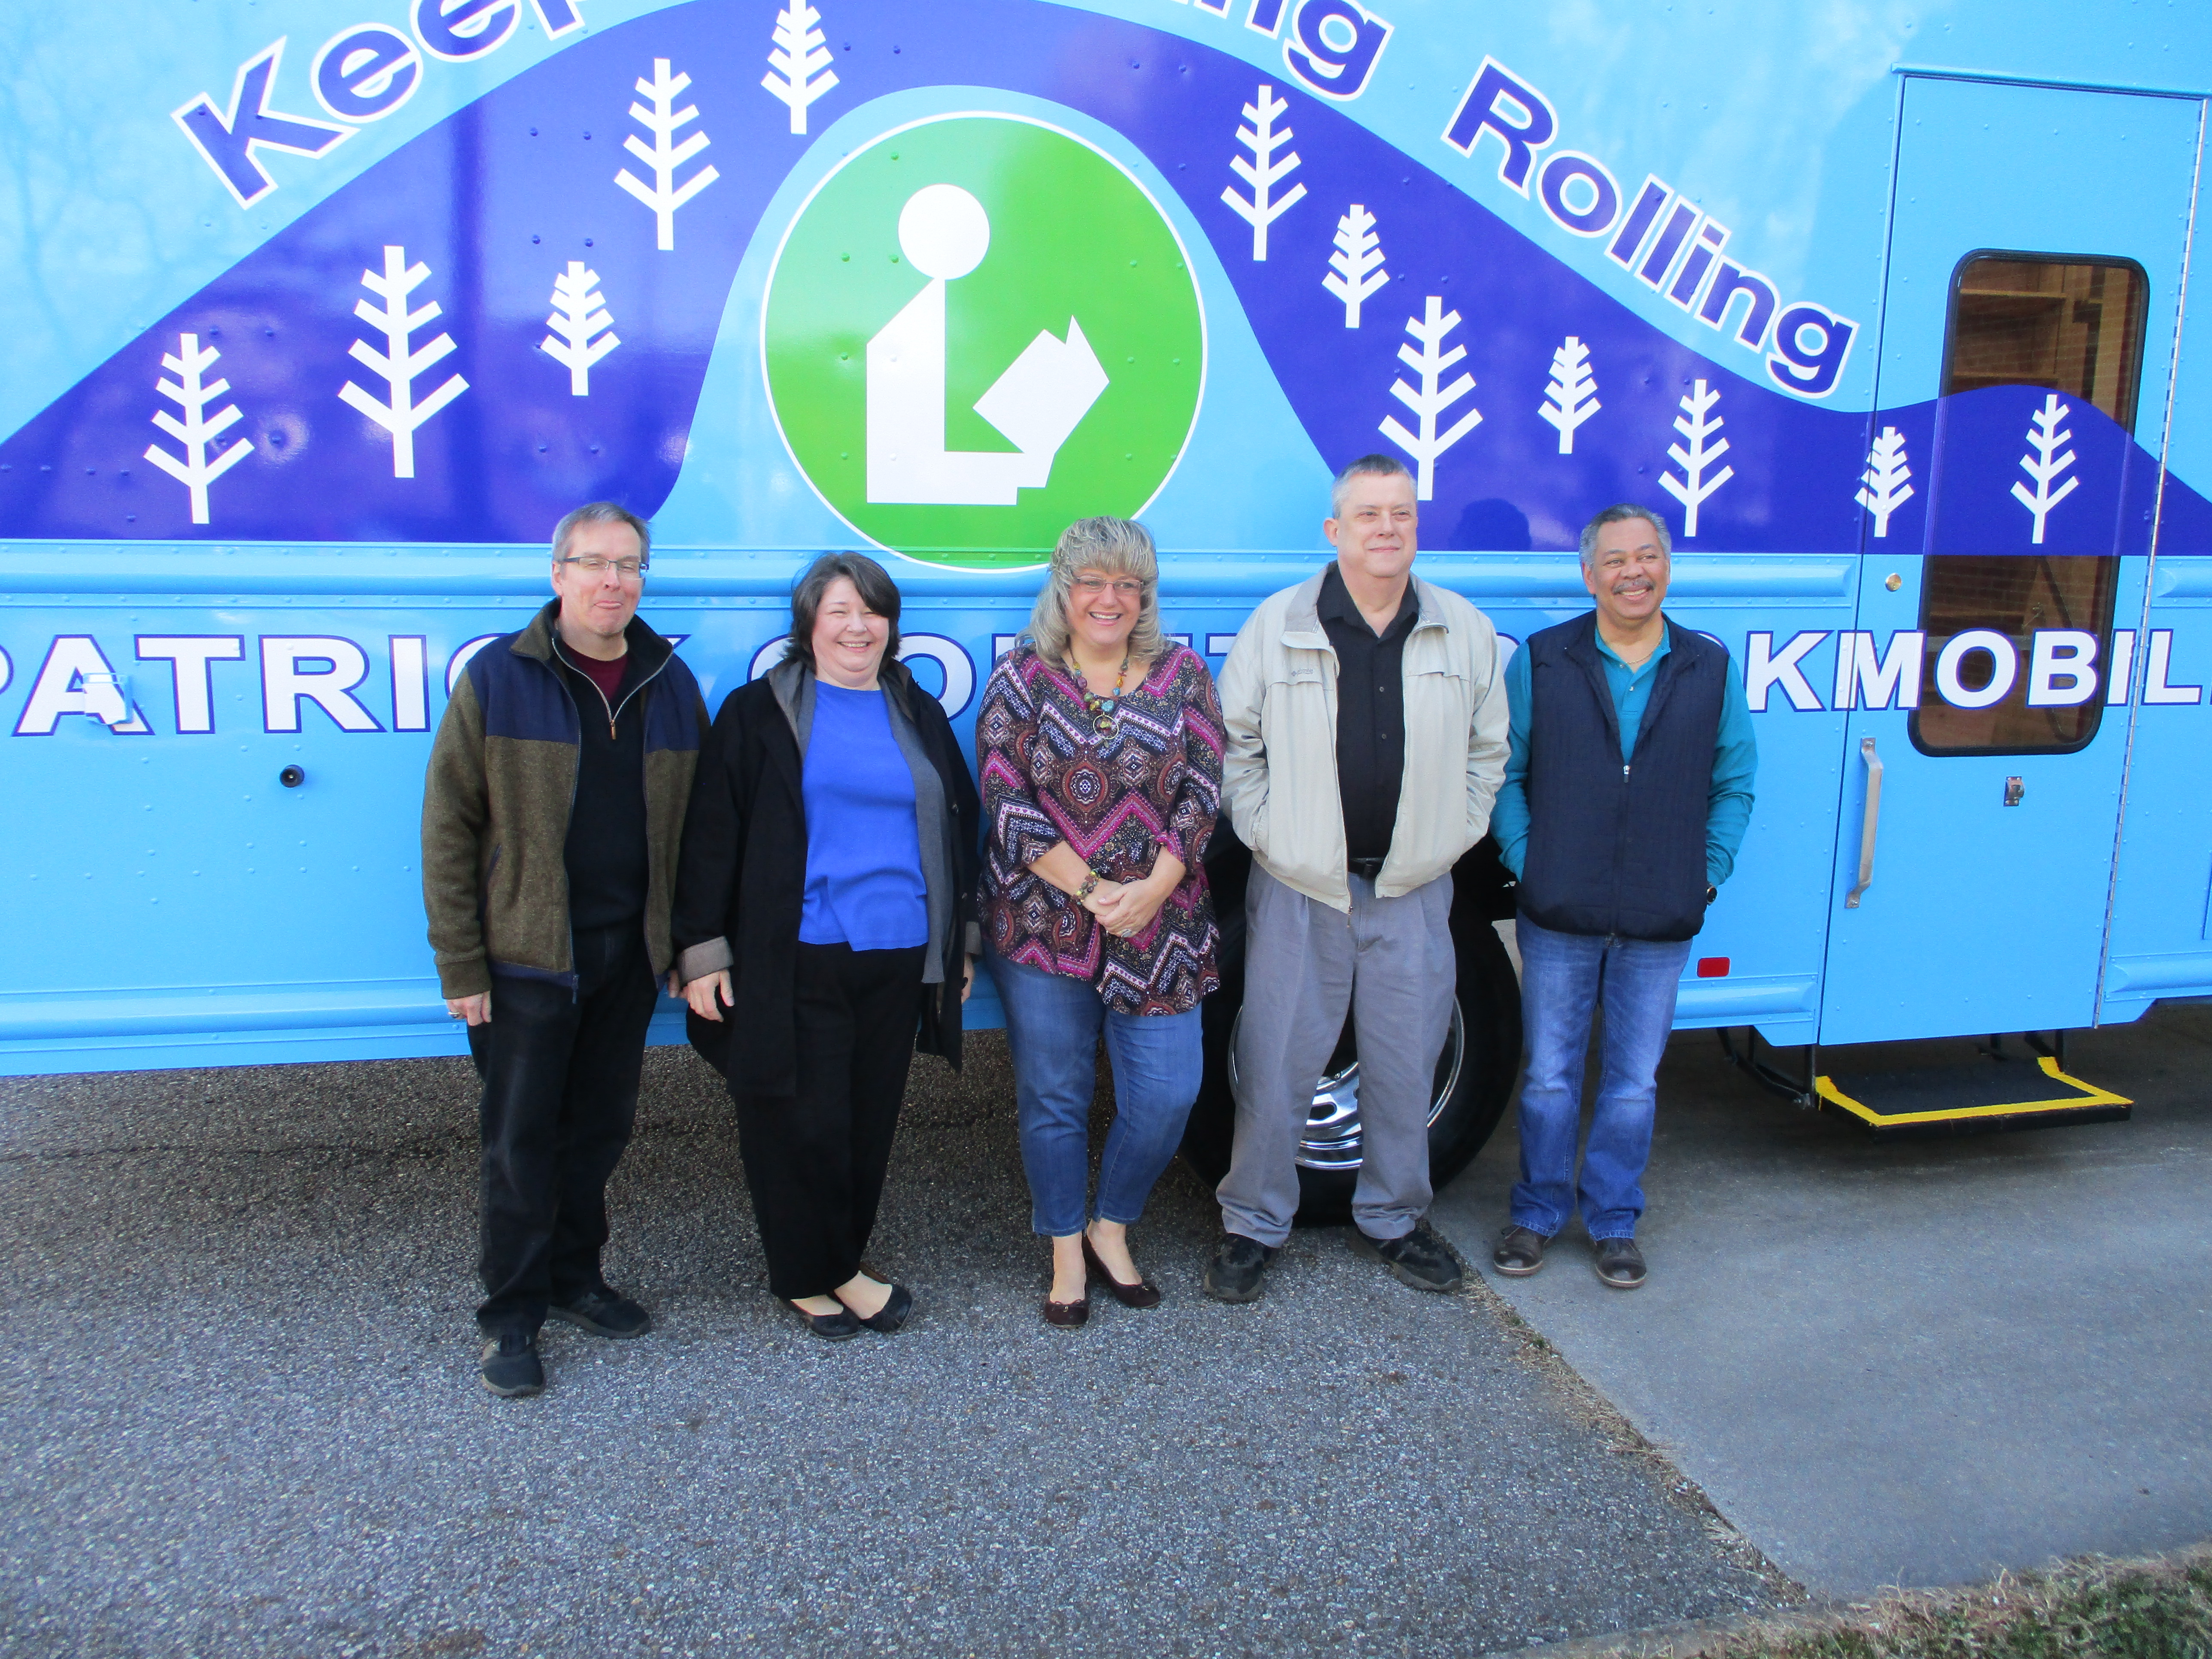 right side bookmobile with patrick county library staff, garry clifton branch manager, childrens librarian gayle wagoner, bookmobile driver, tammy cope, director of the system, rick ward, and assistant branch manager james martin